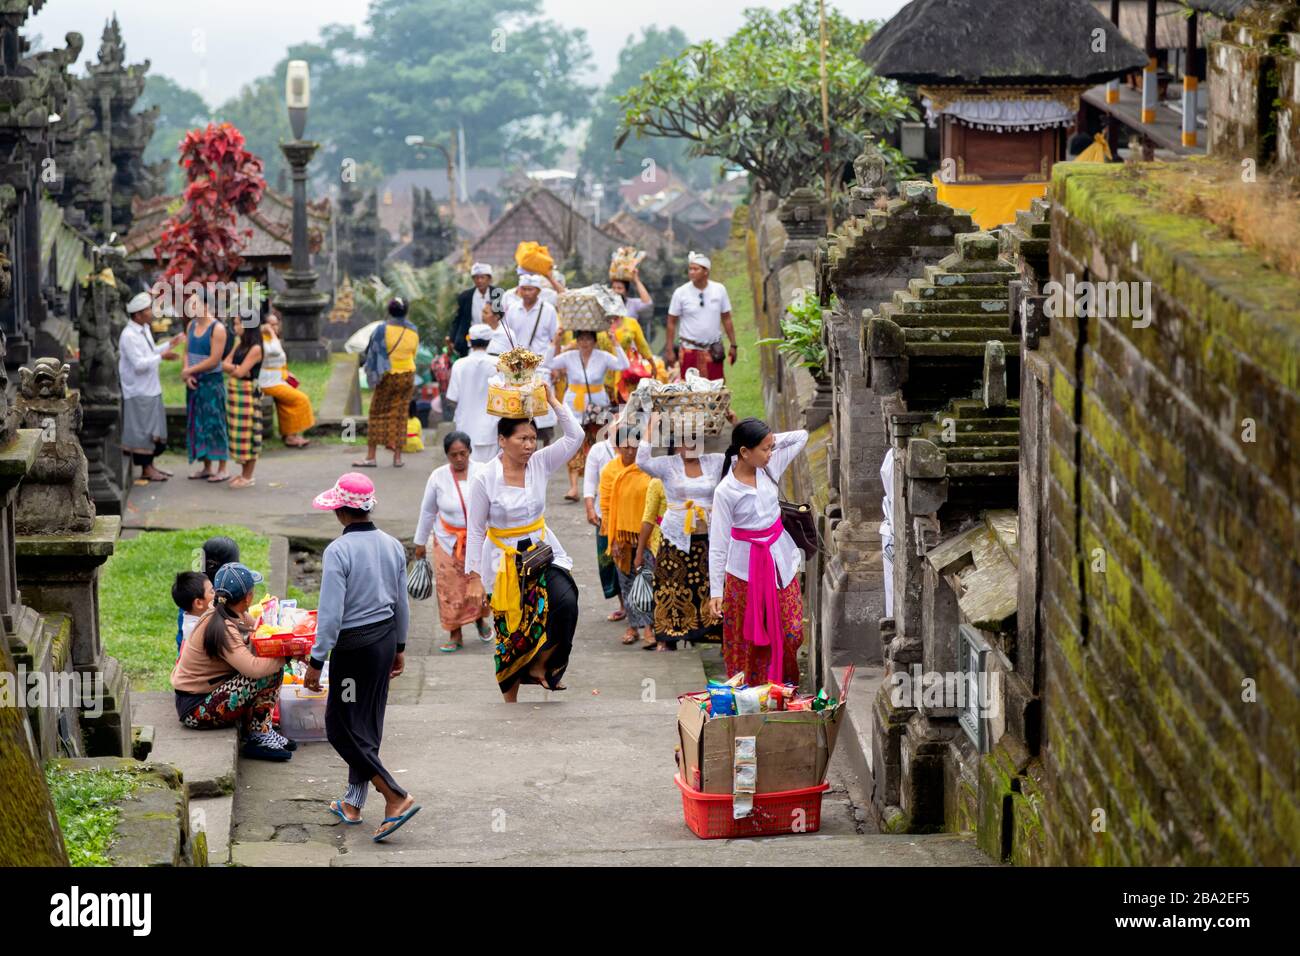 Besakih, Bali, Indonesia - November 24, 2018: Indonesian people at Pura Besakih, or Mother Temple, Balinese largest hinduis temple and most famous tou Stock Photo